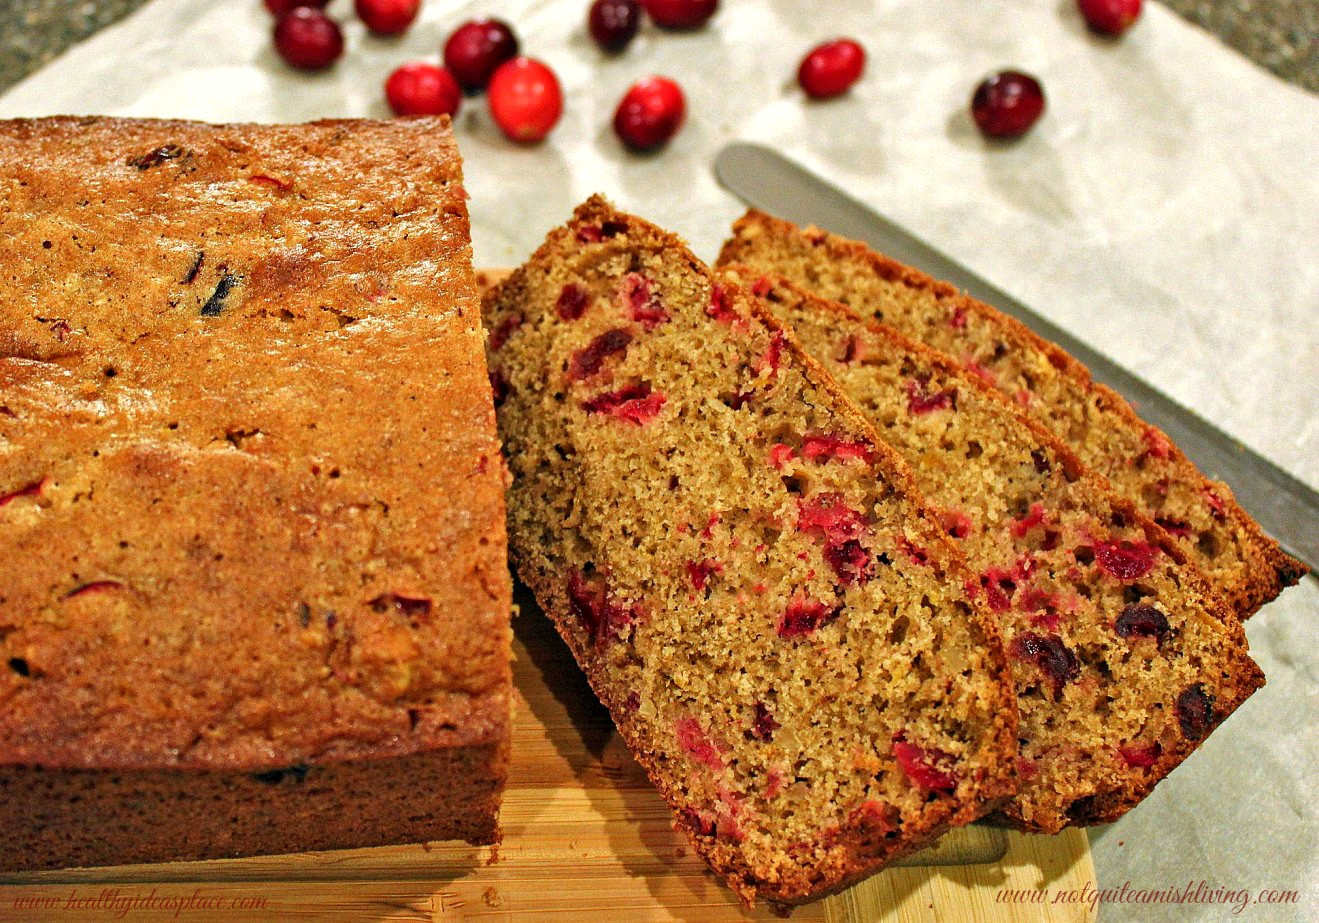 The Best Ideas for Cranberry Christmas Bread – Most Popular Ideas of ...